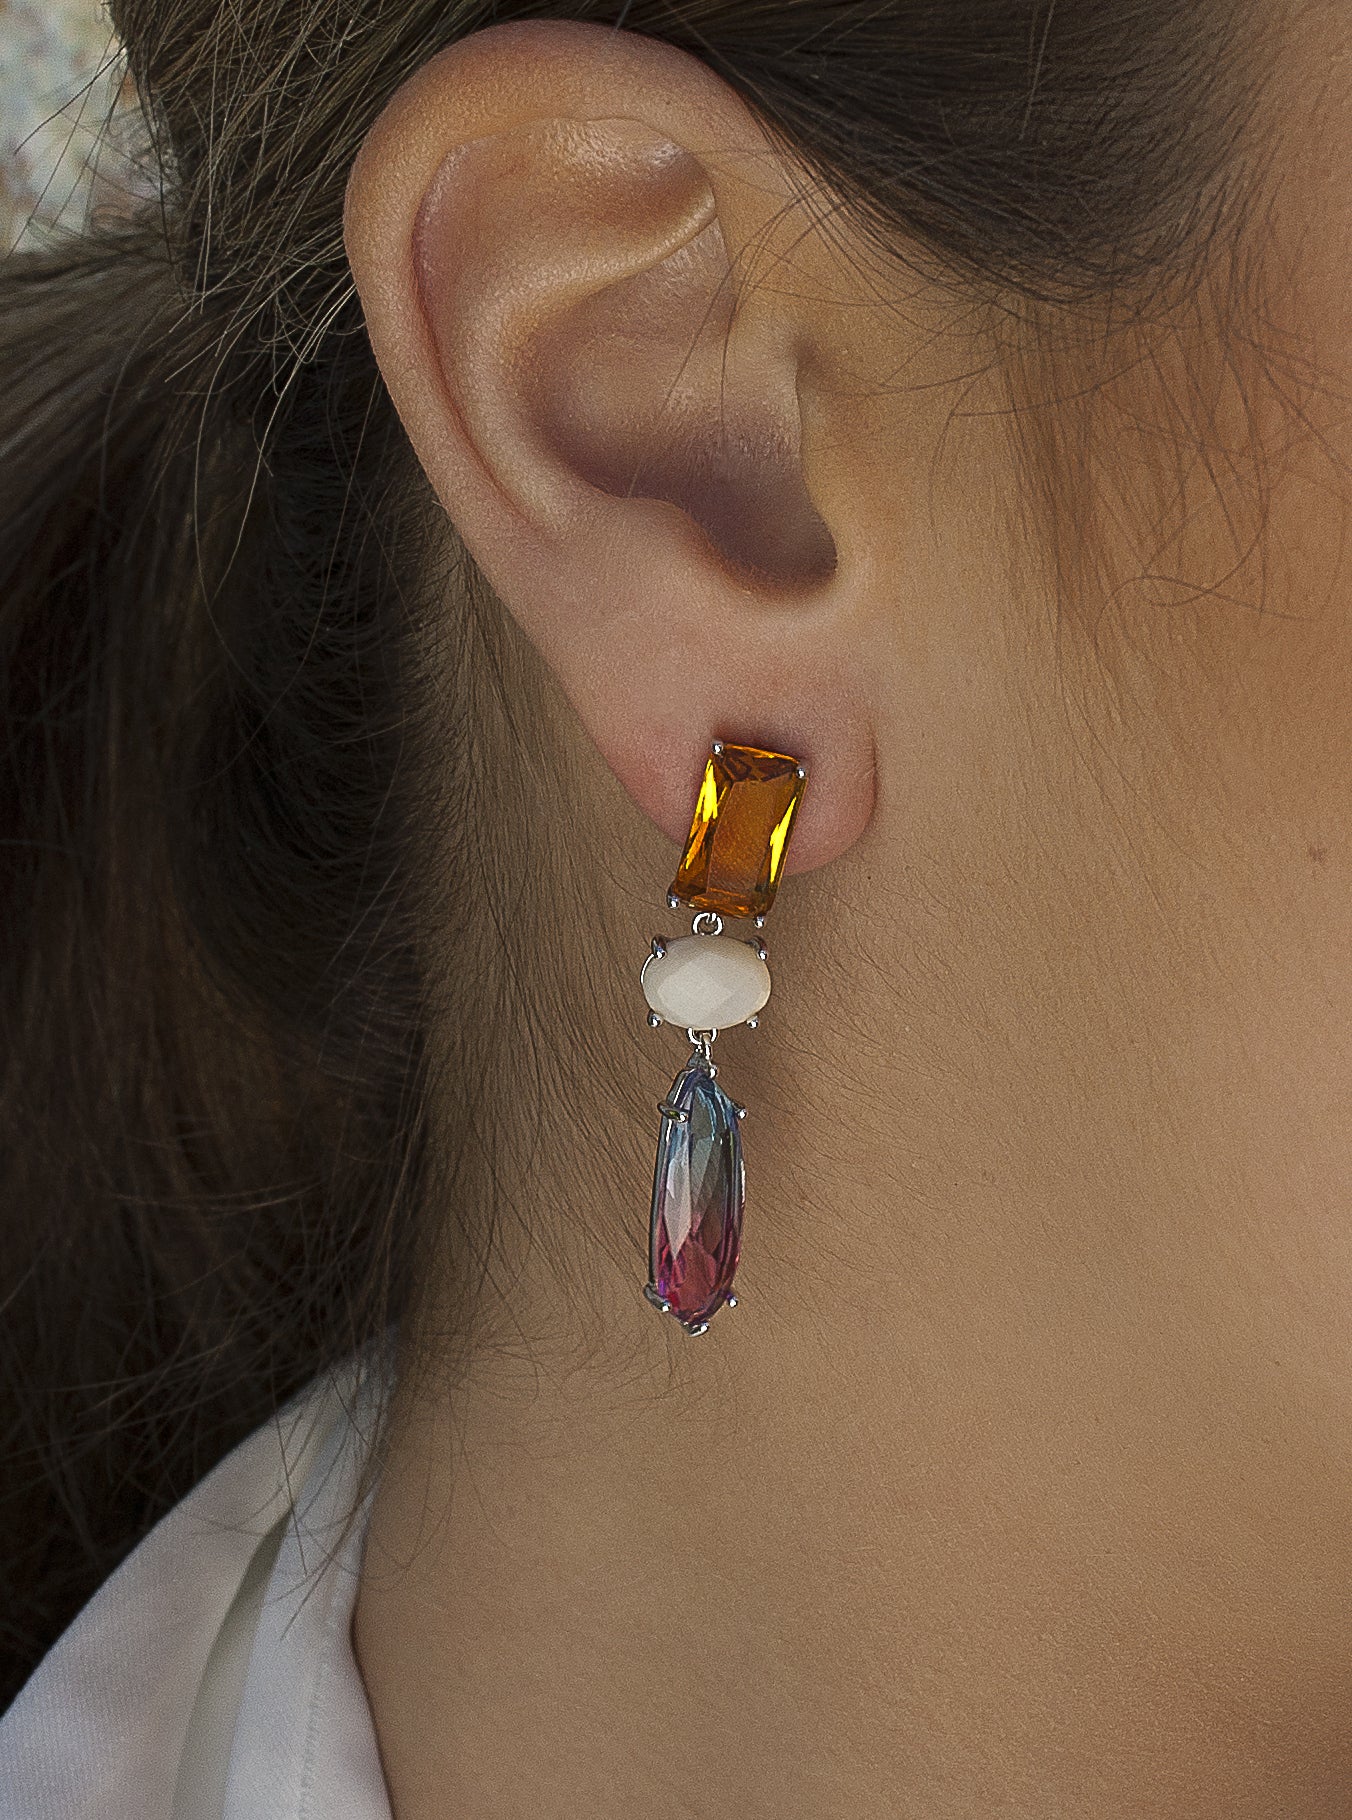 Earrings with colored stones design gradient tones